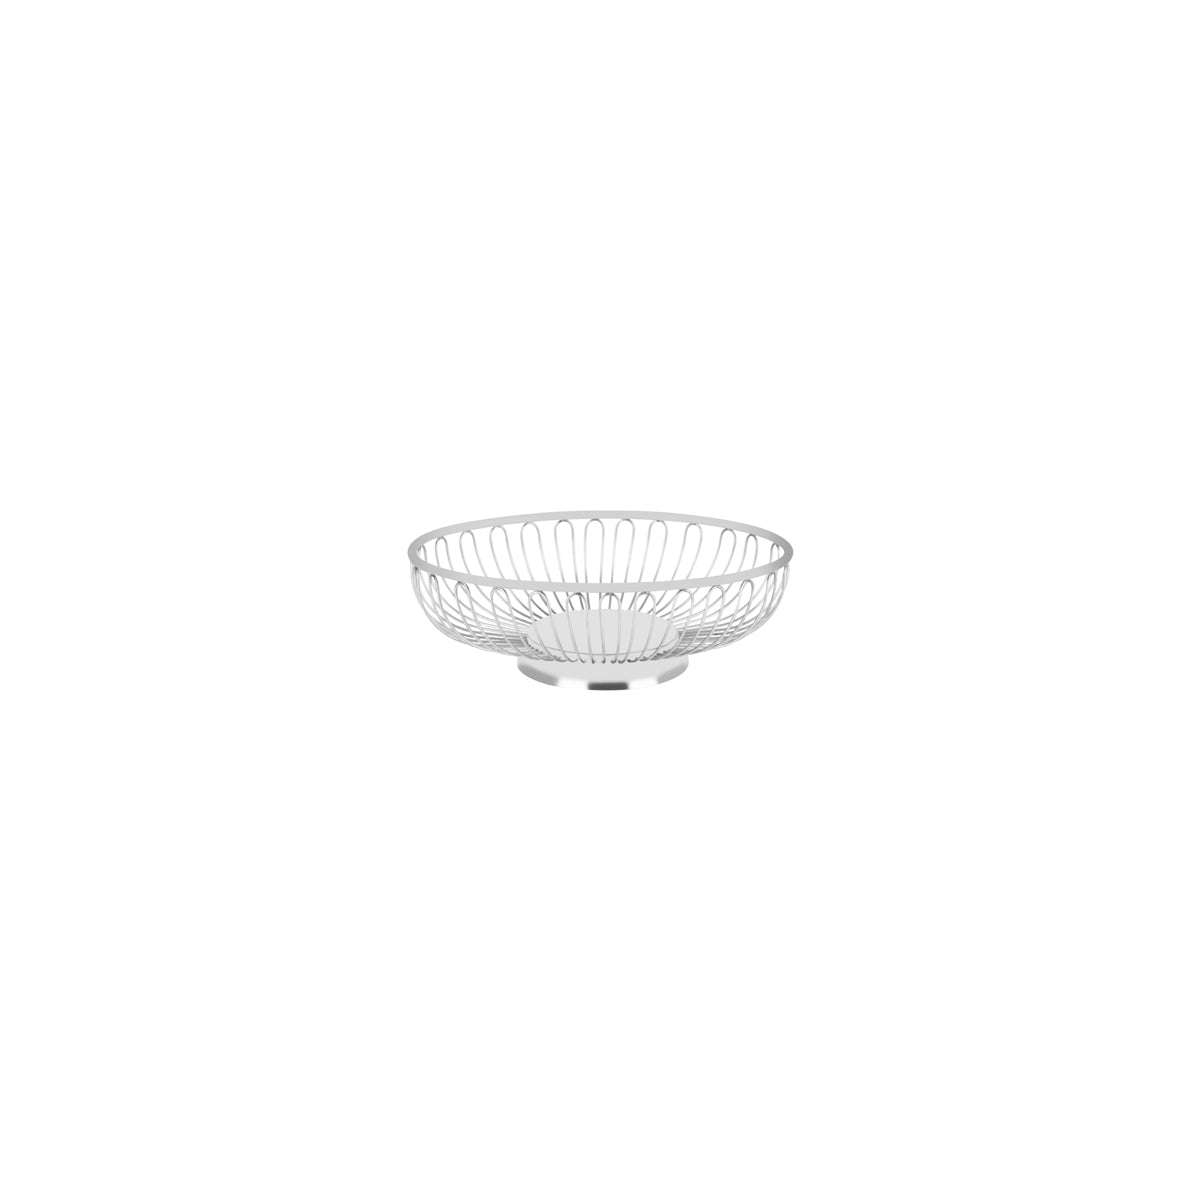 70358 Chef Inox Oval Wire Basket Solid Base Stainless Steel 198x145x60mm Tomkin Australia Hospitality Supplies